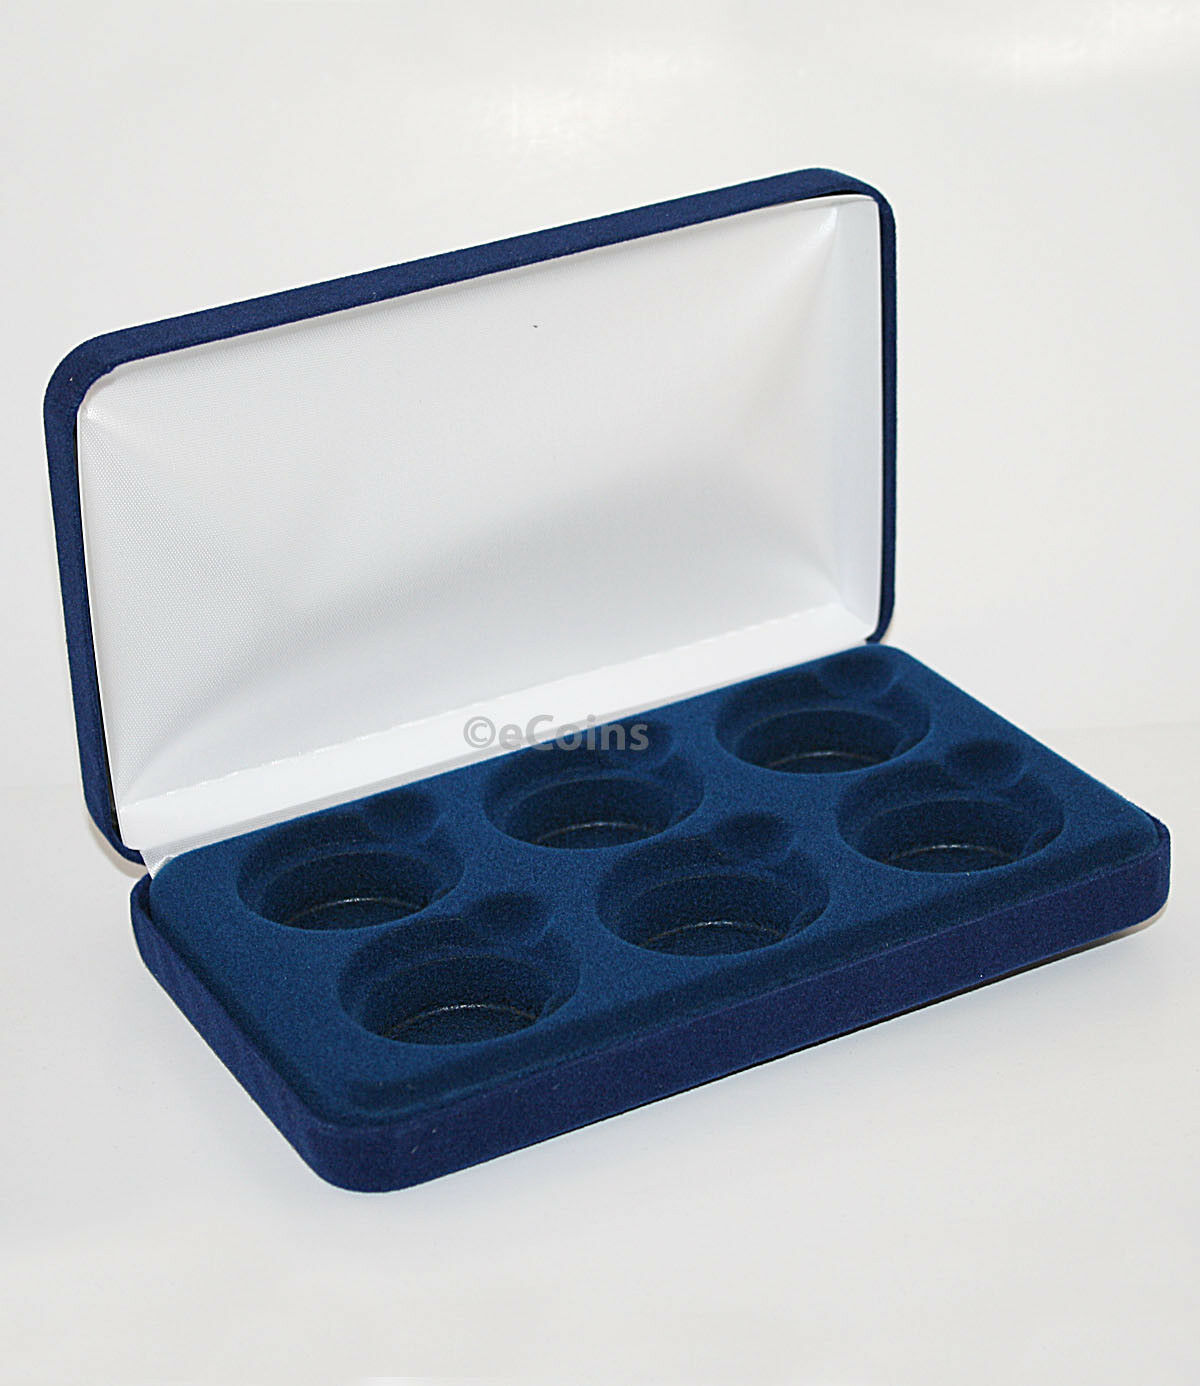 Felt COIN DISPLAY GIFT METAL PLUSH BOX holds 6-IKE or 6 Silver Eagles ASE - $13.98